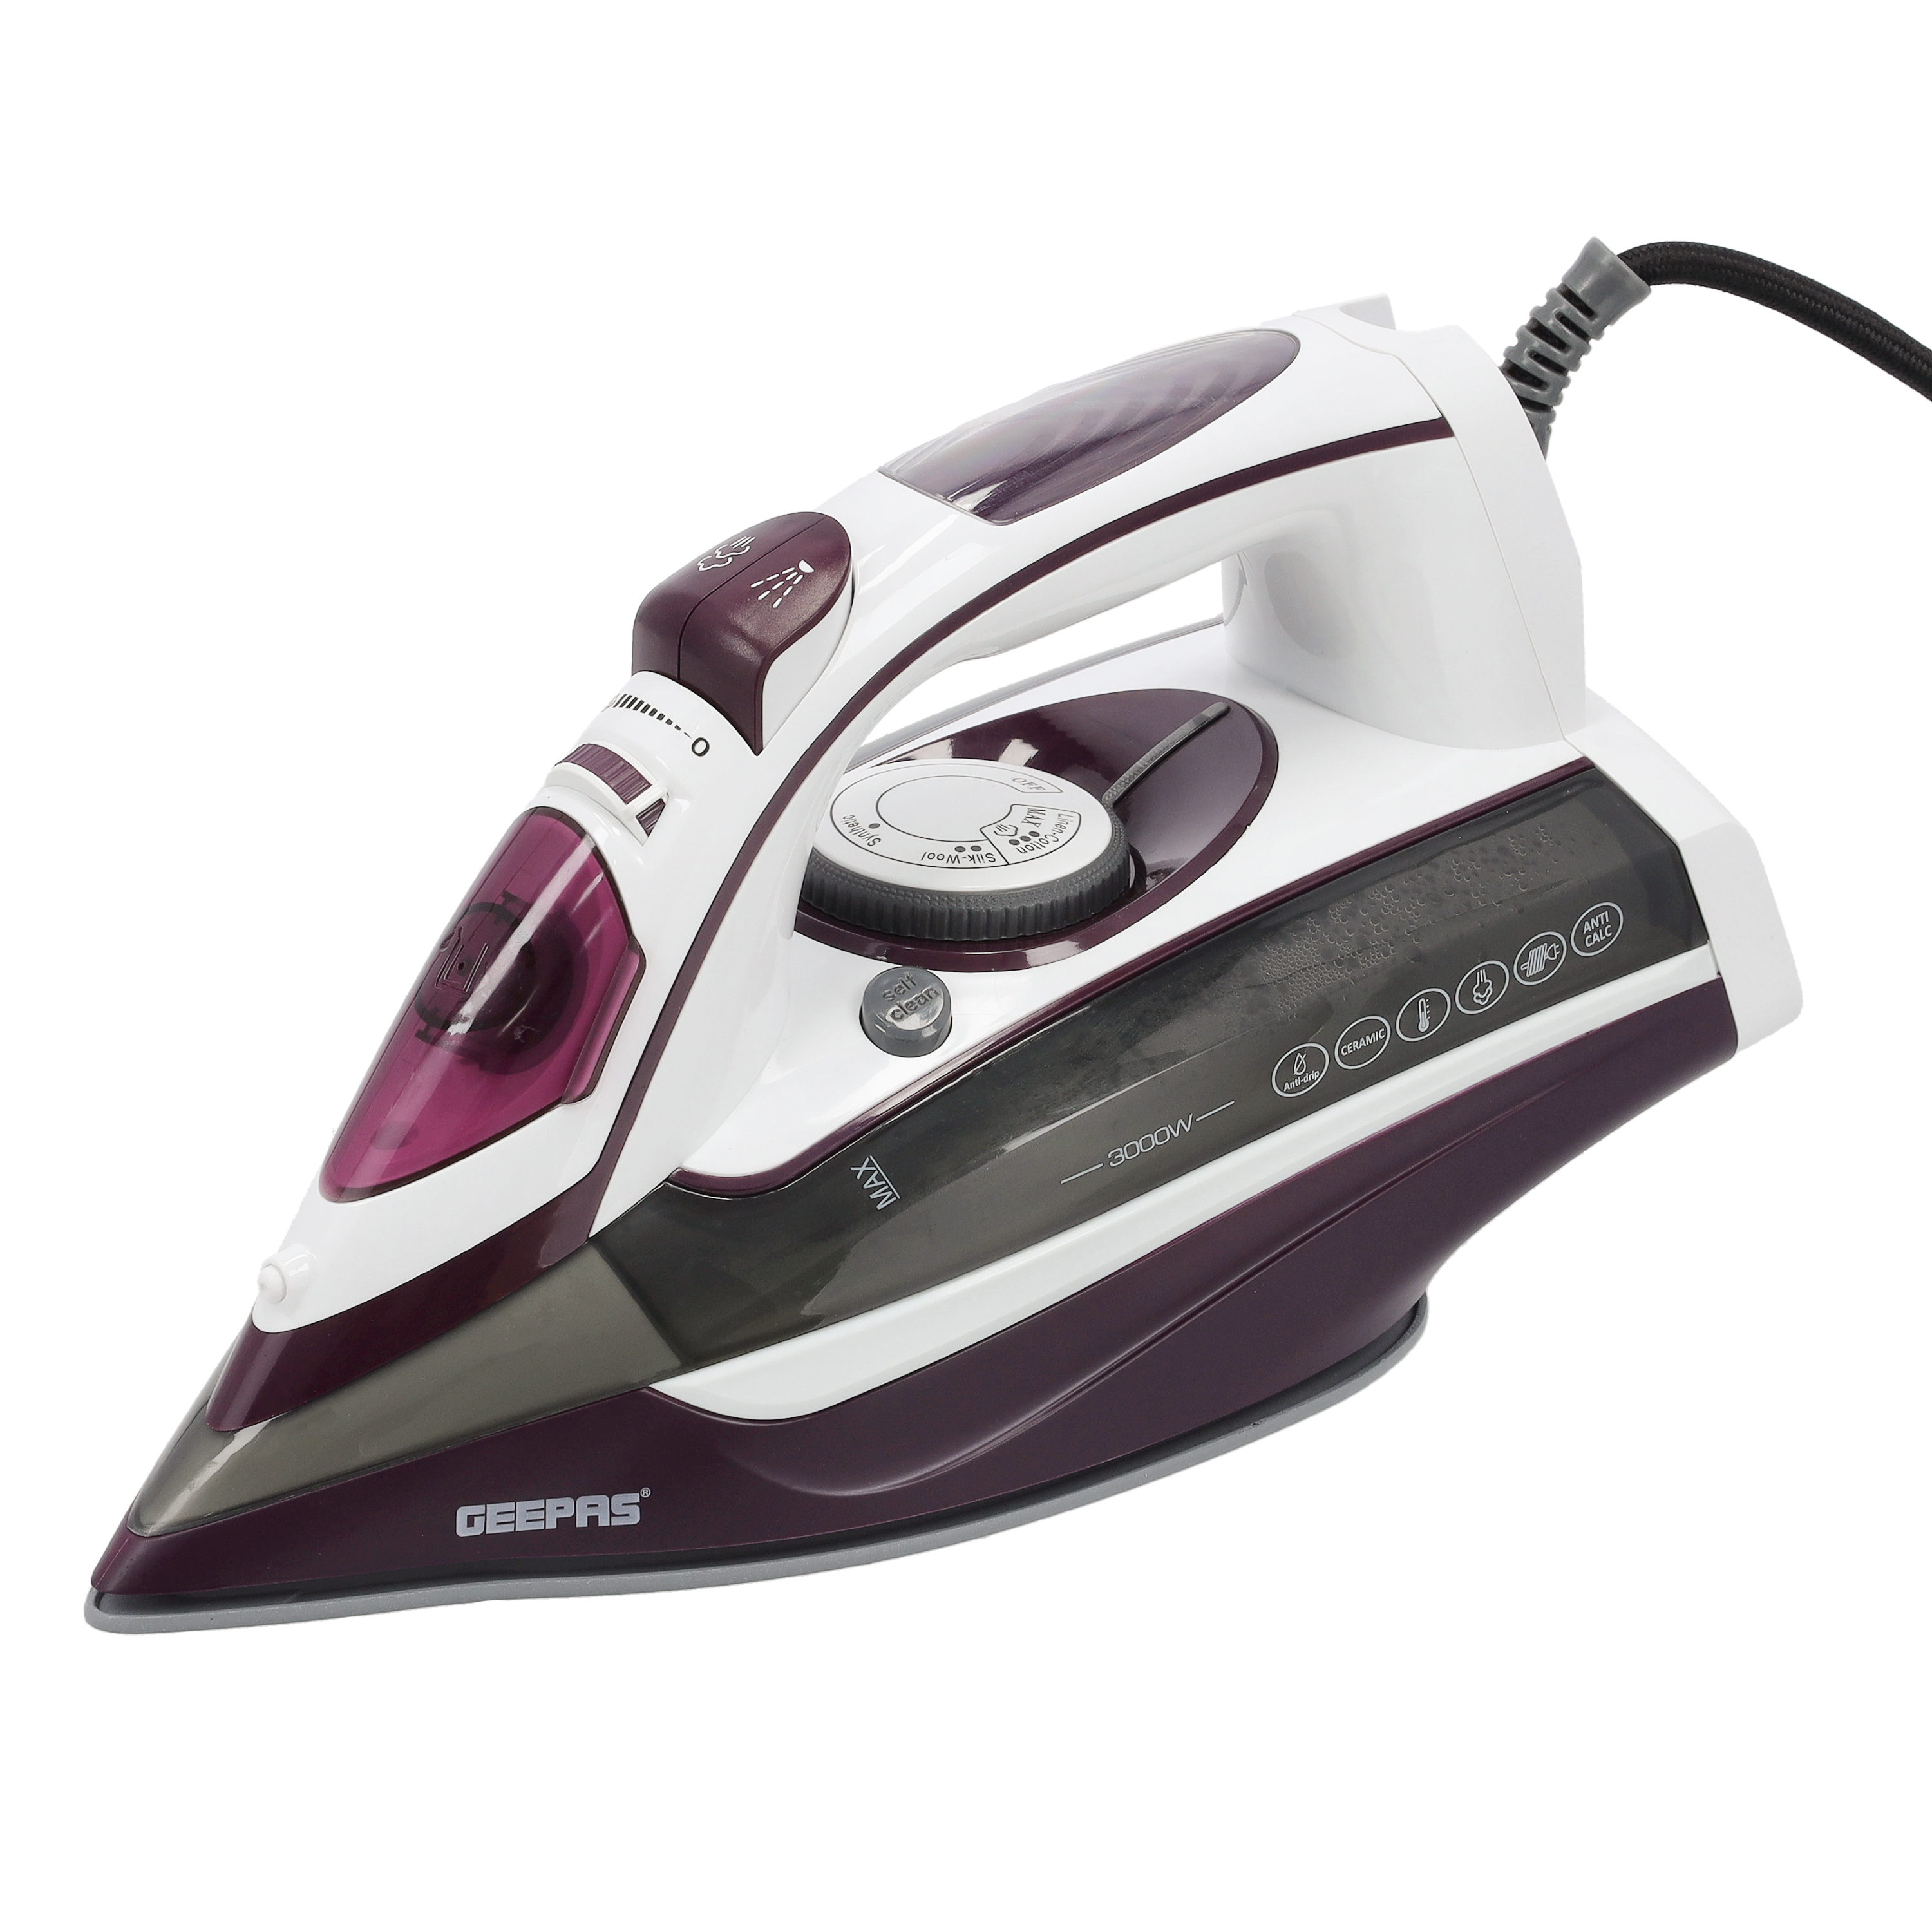 Adjustable Temperature Control Steam Function with Ceramic Coating Plate 2 Year Warranty Geepas 2200W Steam Iron for Crisp Ironed Clothes